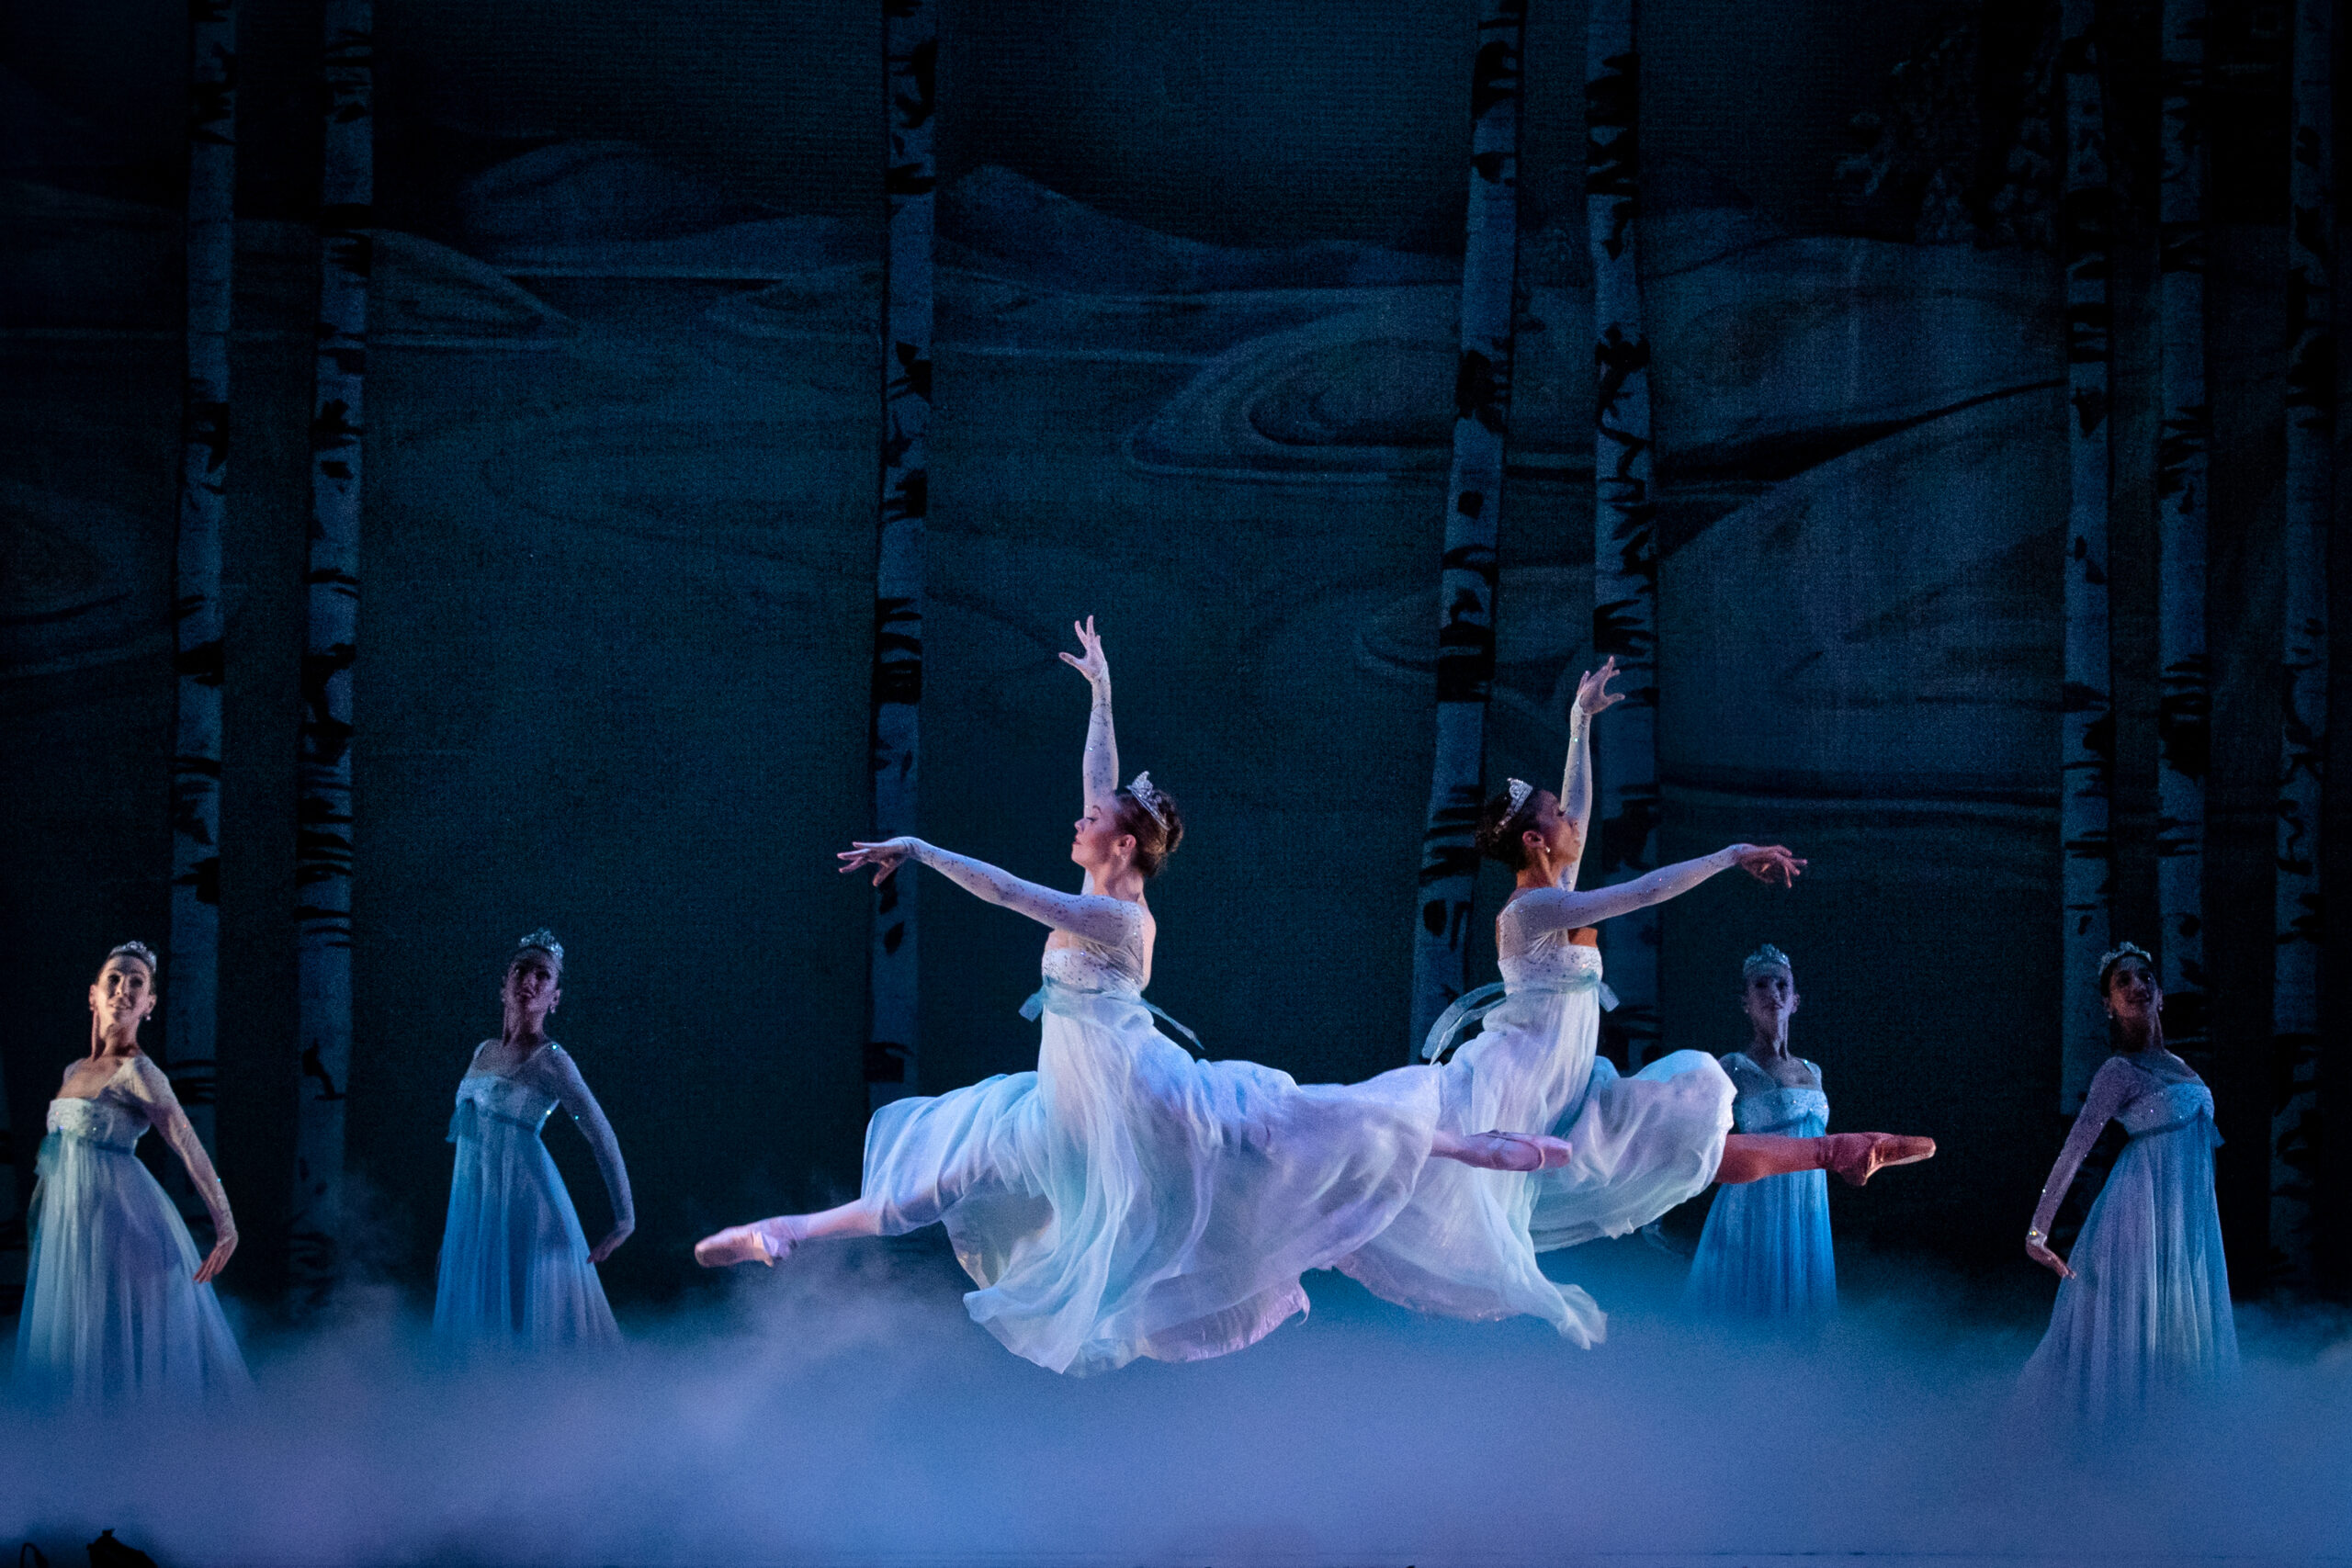 Two dancers dressed in white, flowing gowns perform a leap over mist.